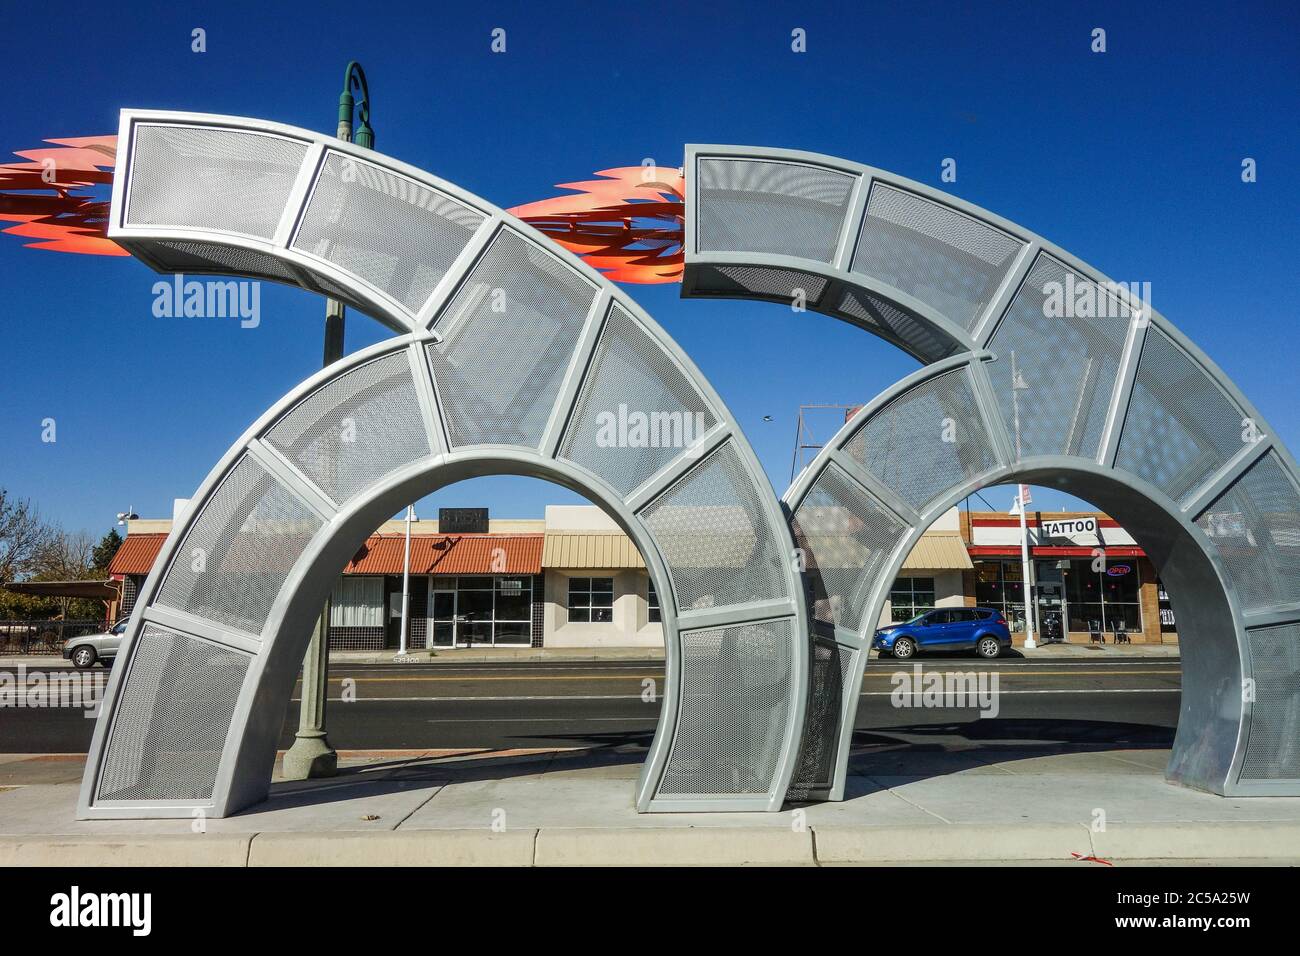 Reels and Wheels - public art sculpture by Hiland Theatre in Albuquerque ,NM Stock Photo